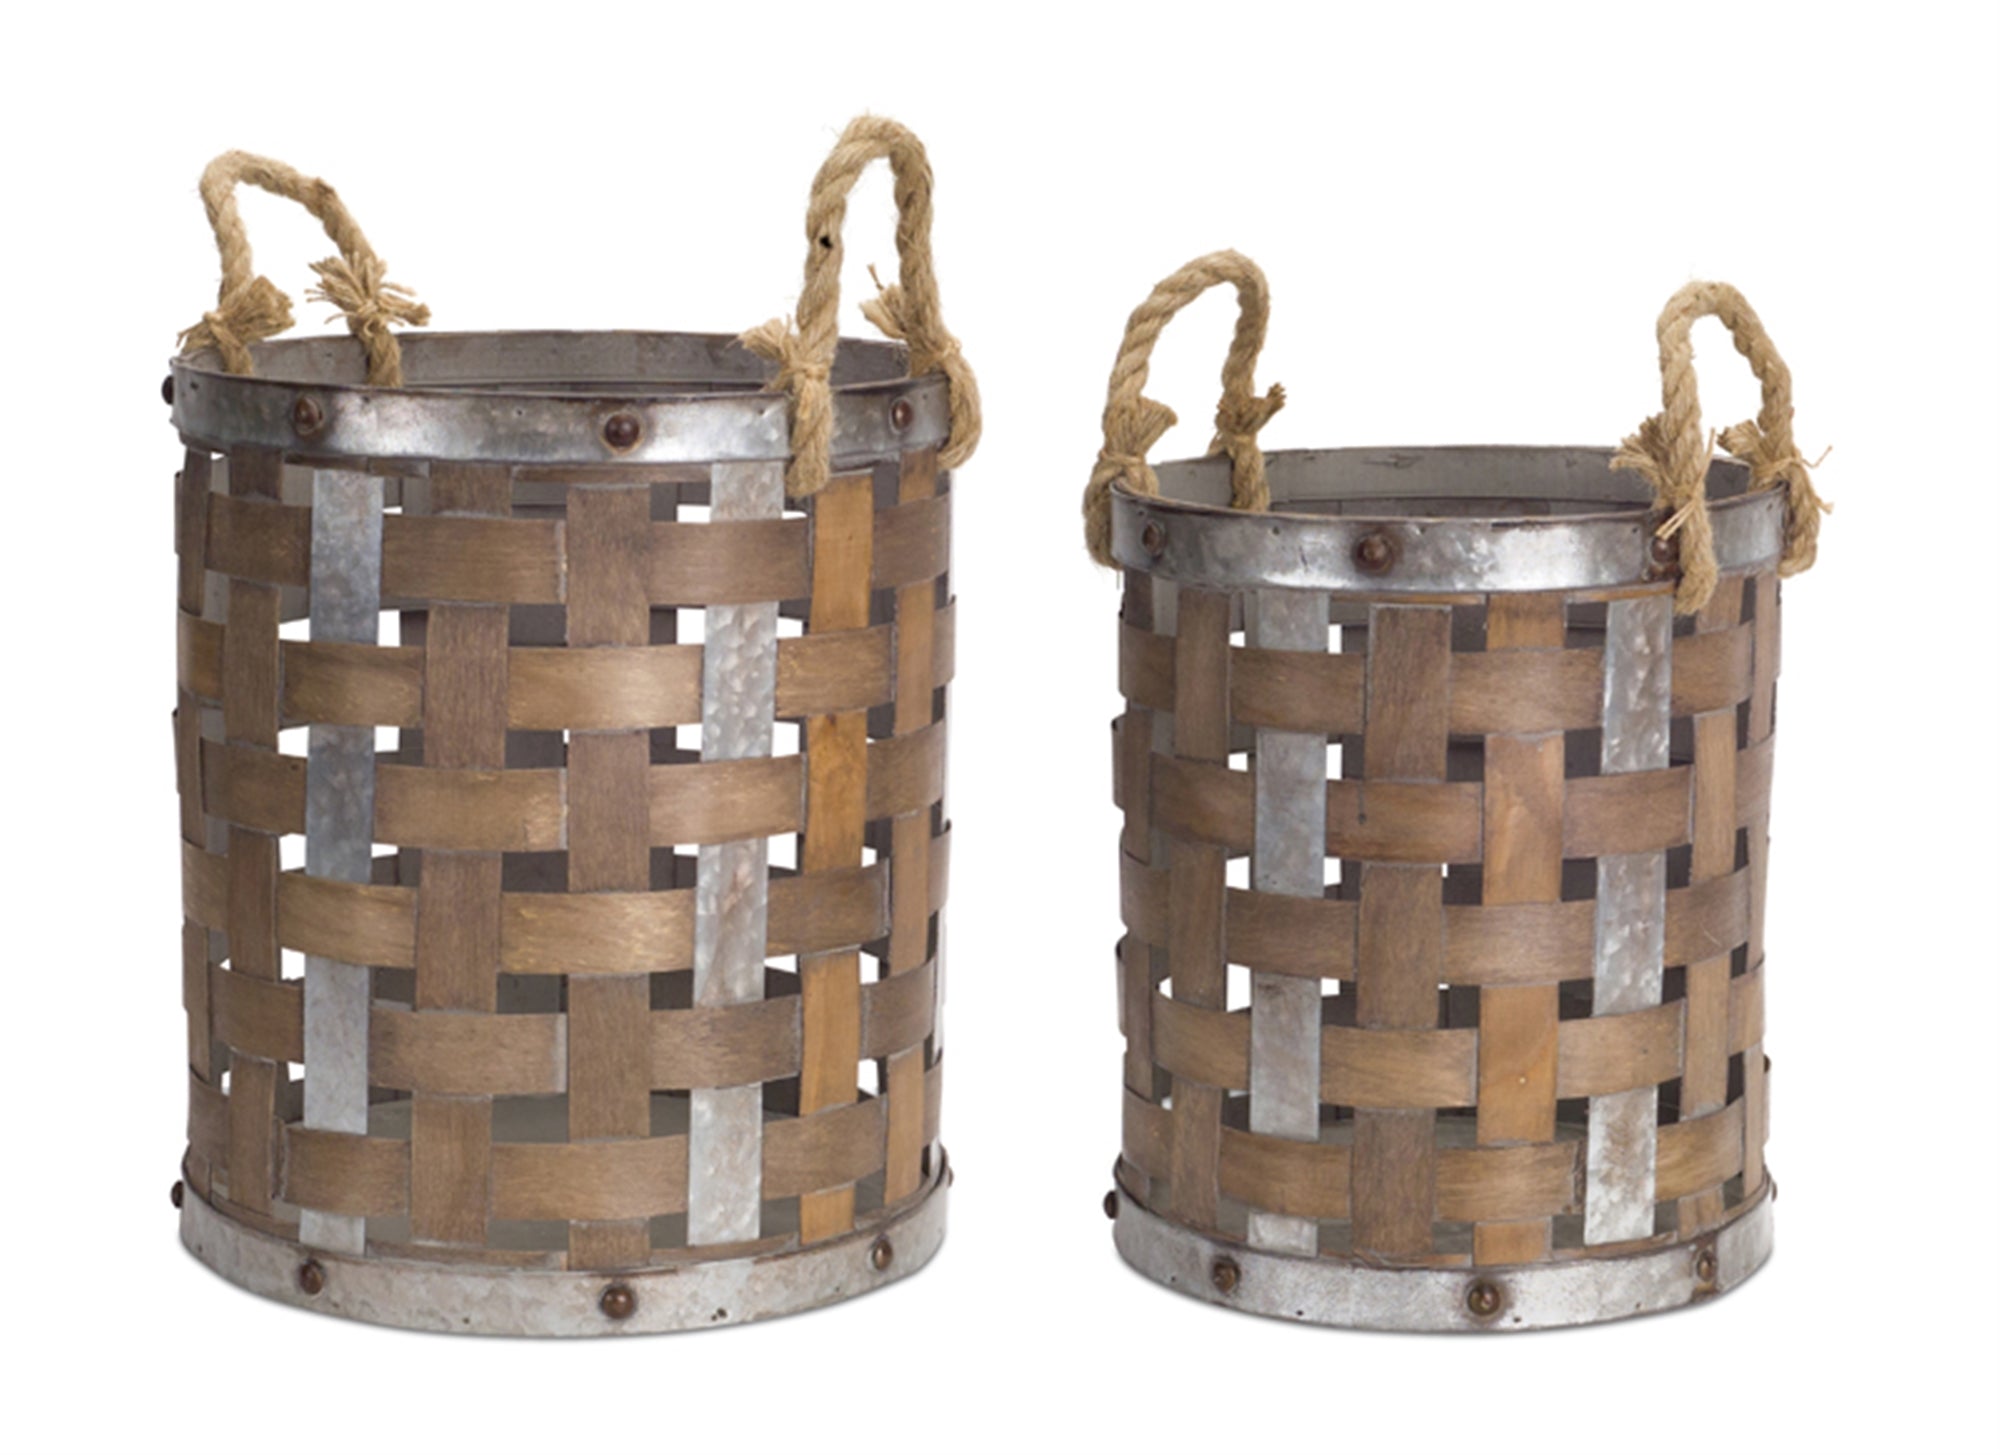 Industrial Set of Metal and Wood Pails